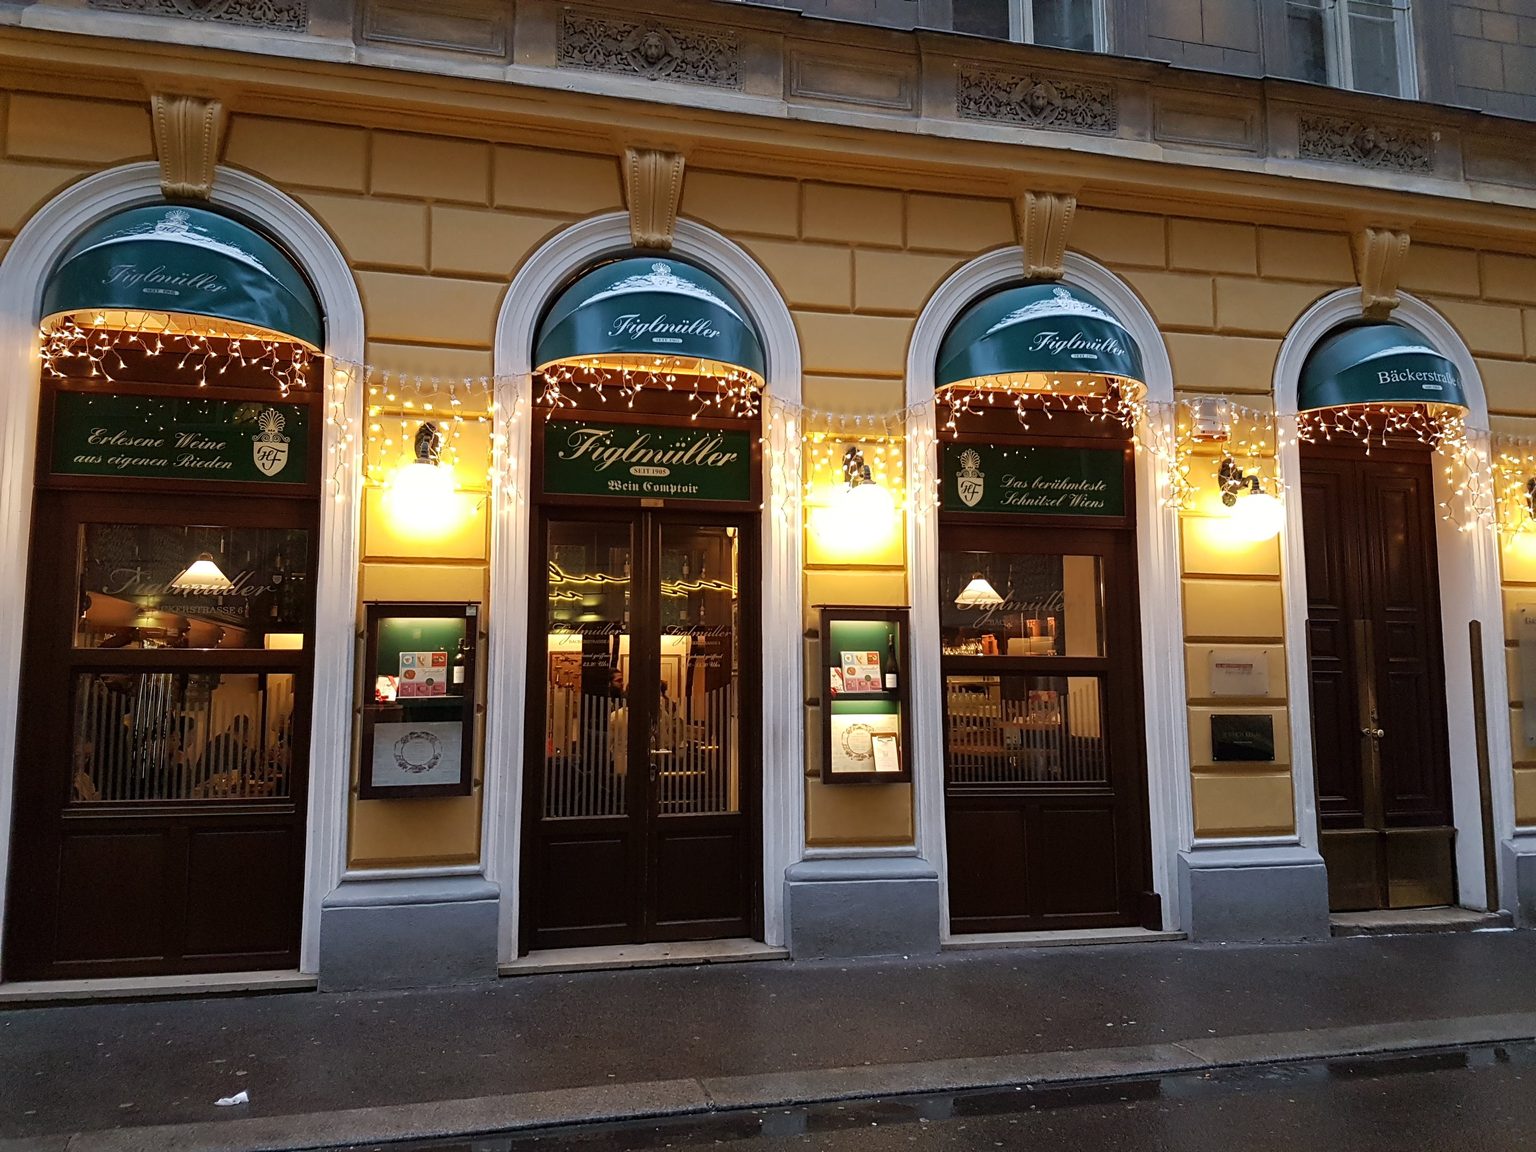 Figlmüller - One of top 10 restaurants for lunches and dinners by district in Vienna